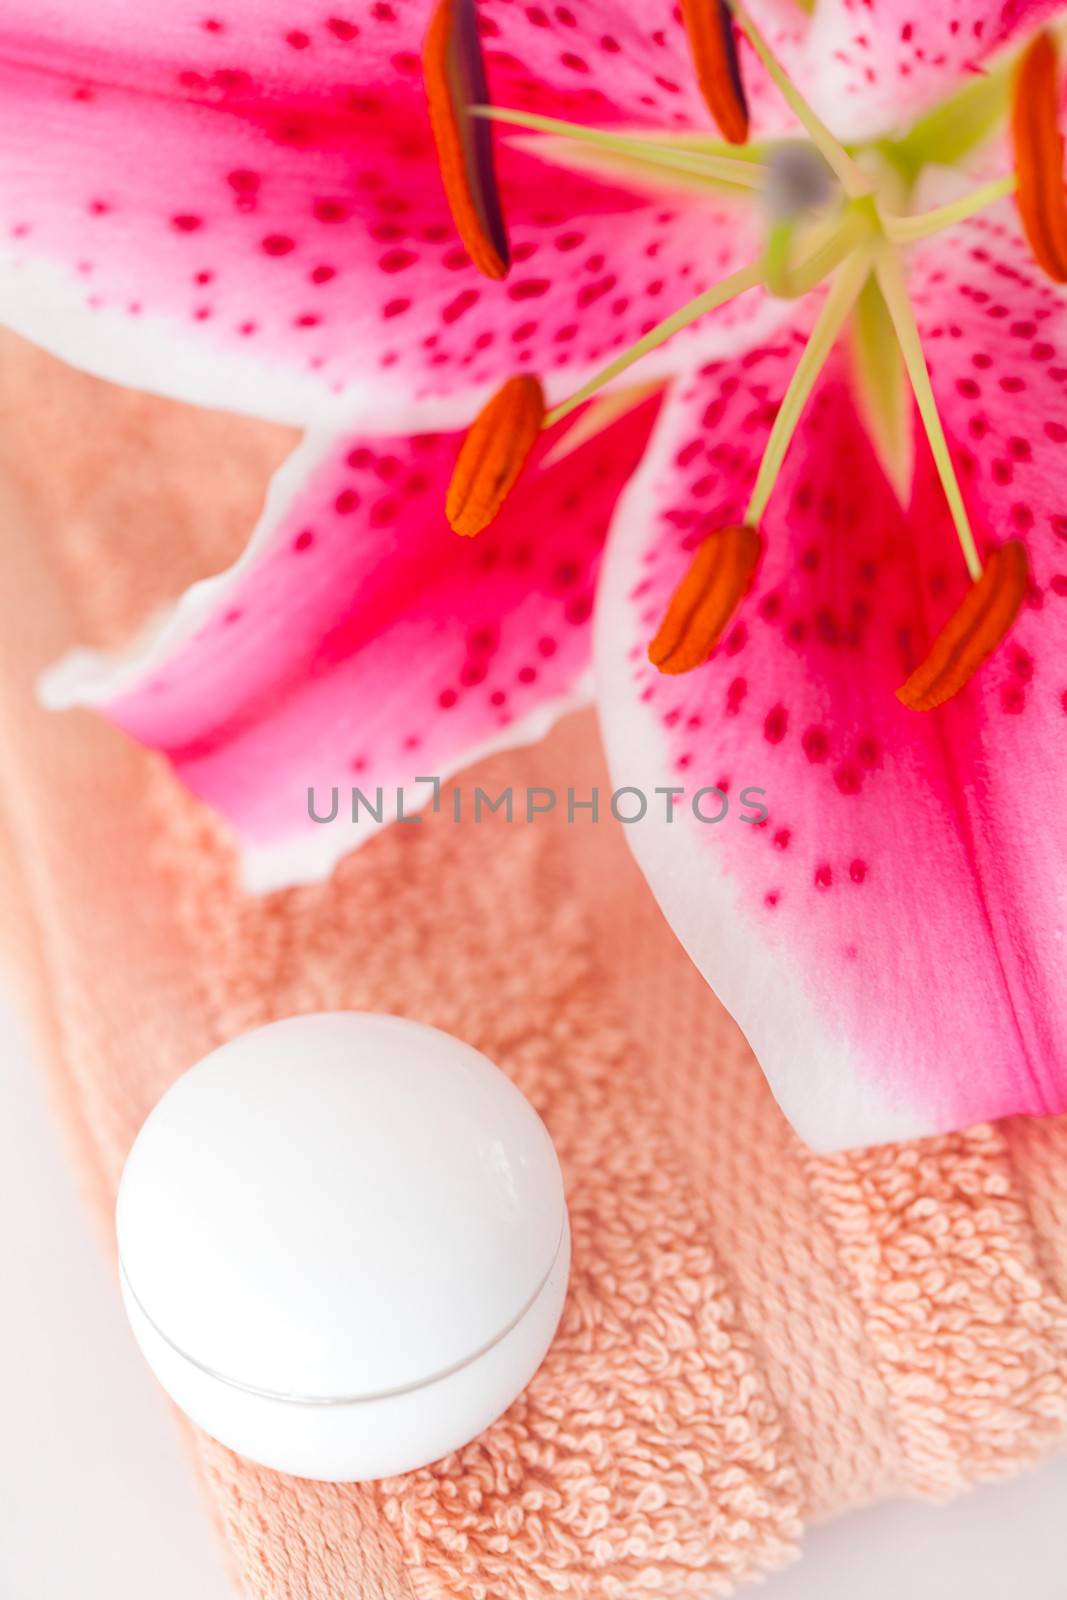 beautiful lily in a vase, towel and cosmetic containers by jannyjus